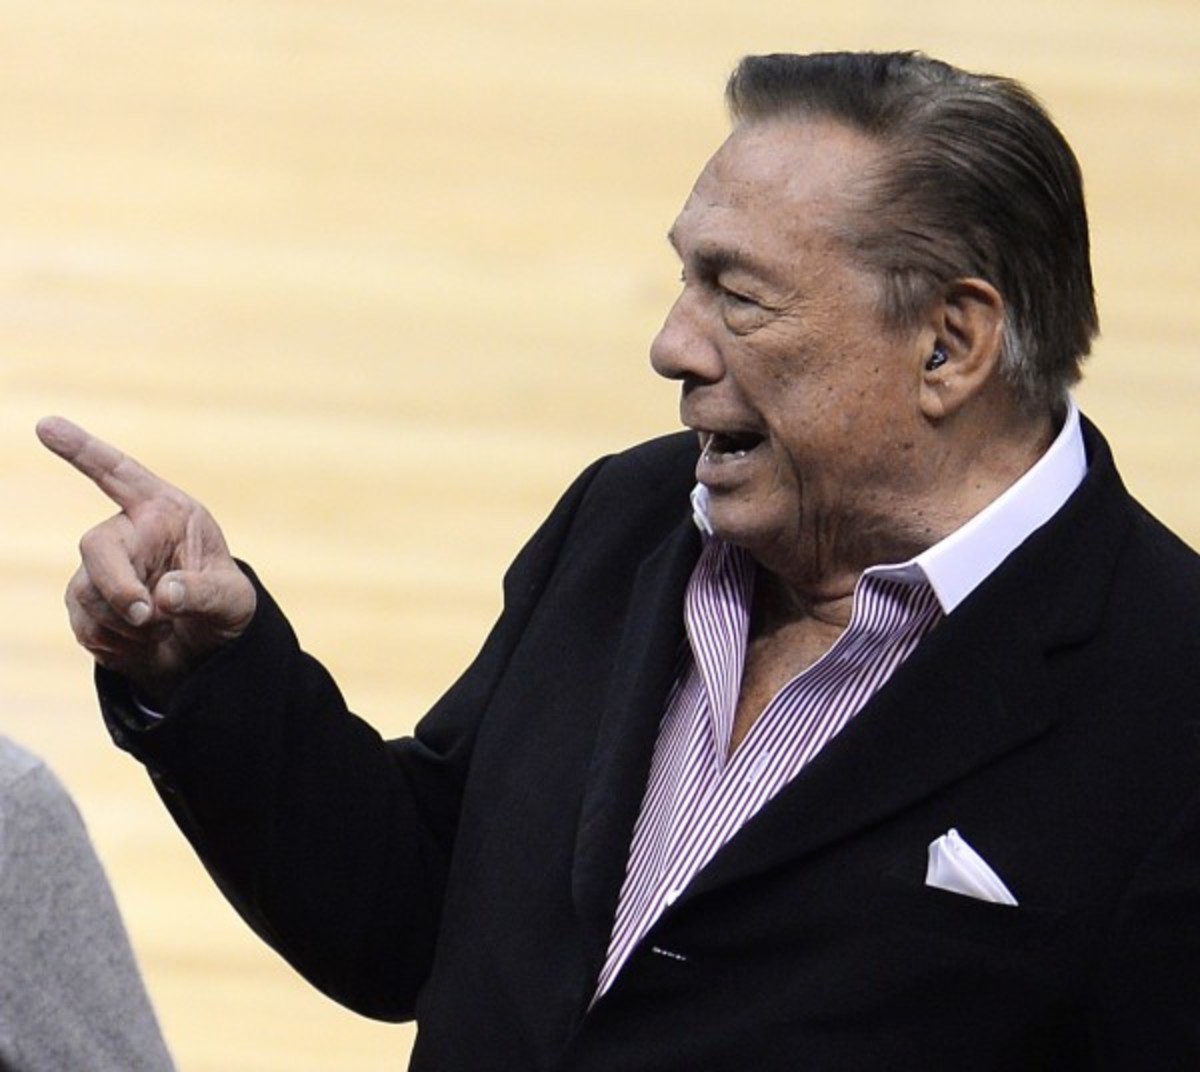 Donald Sterling purchased the Clippers for $12.5 million in 1981. (Robyn Beck/Getty Images)